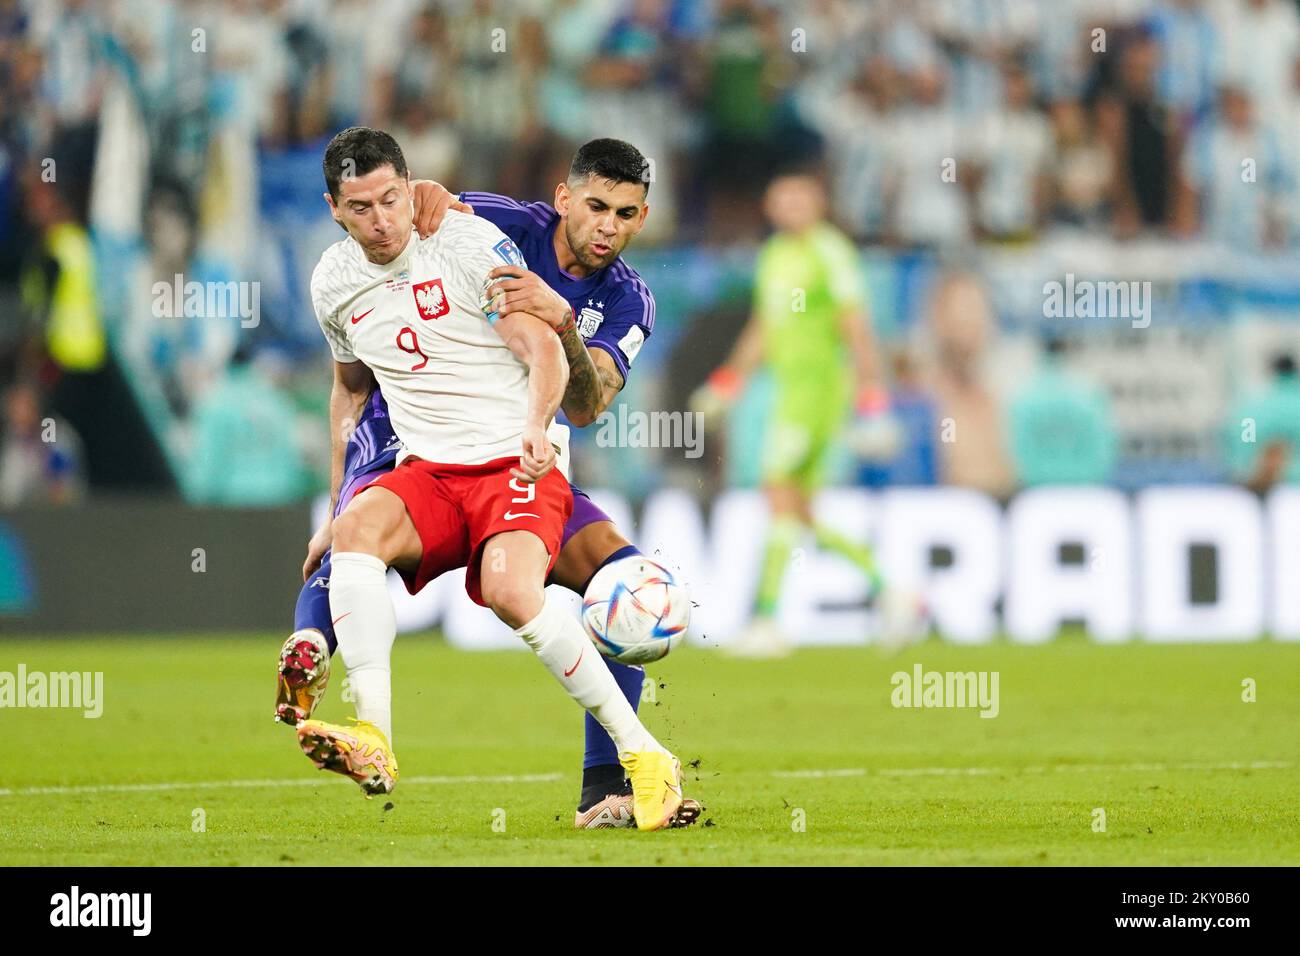 DOHA, QATAR - NOVEMBER 30: Player of Argentina Cristian Romero fights for the ball with player of Poland Robert Lewandowski during the FIFA World Cup Qatar 2022 group C match between Argentina and Poland at Stadium 974 on November 30, 2022 in Doha, Qatar. (Photo by Florencia Tan Jun/PxImages) (Florencia Tan Jun/SPP) Credit: SPP Sport Press Photo. /Alamy Live News Stock Photo